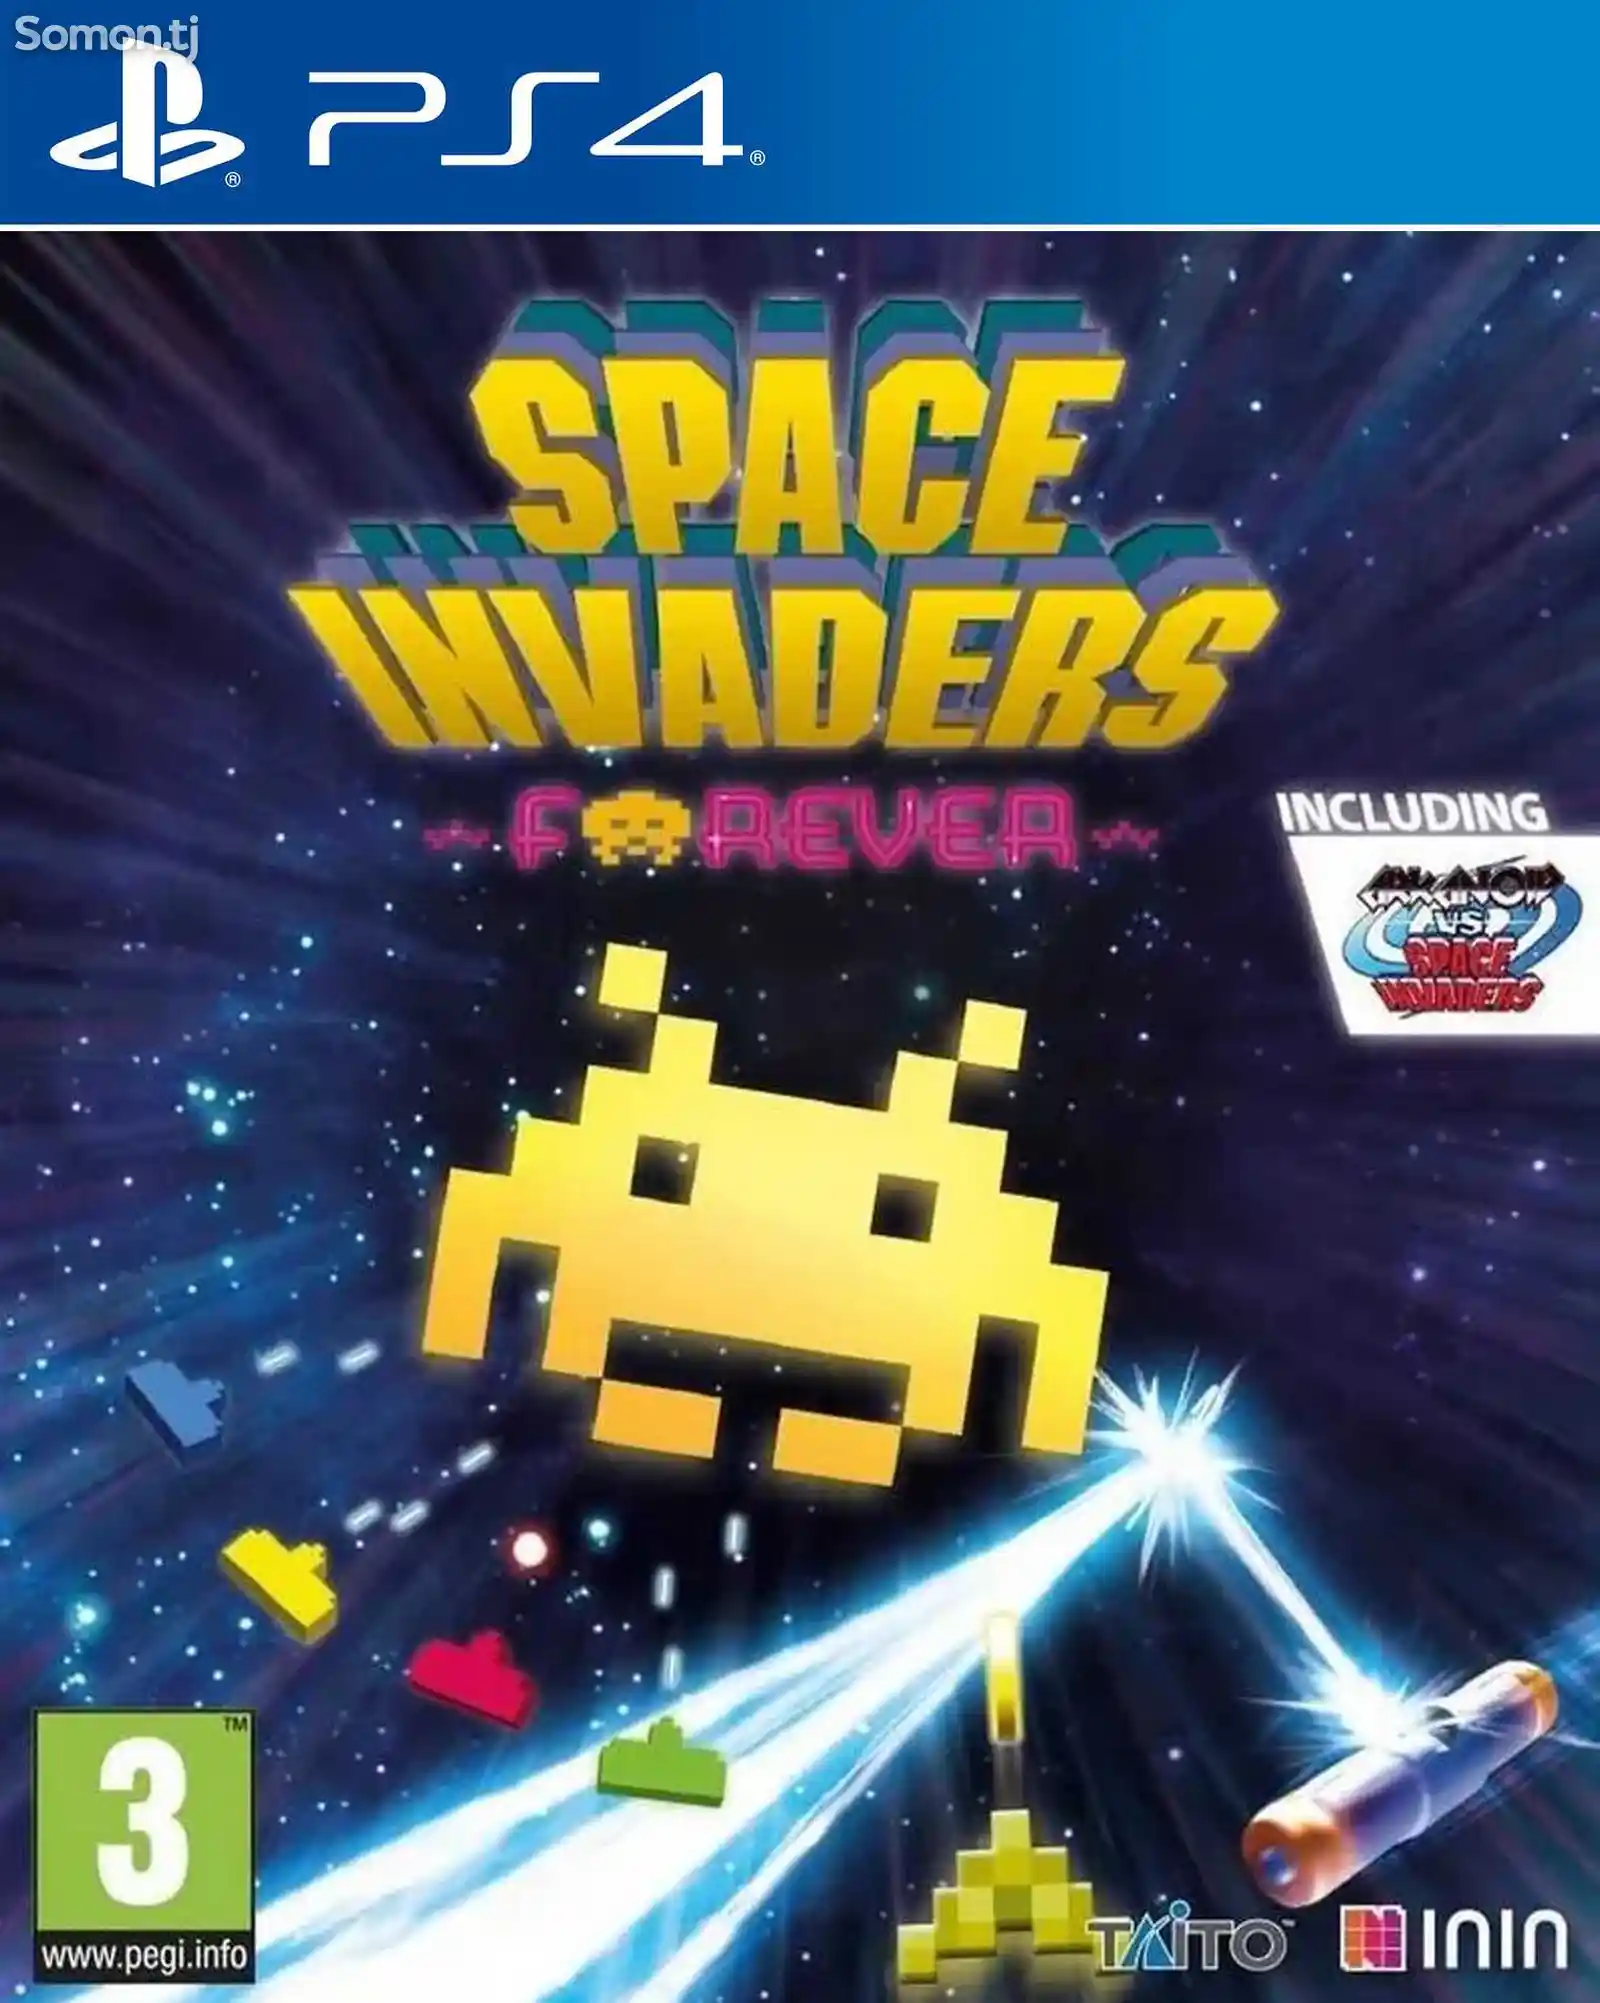 Игра Space invaders forever для PS-4 / 5.05 / 6.72 / 7.02 / 7.55 / 9.00 /-1